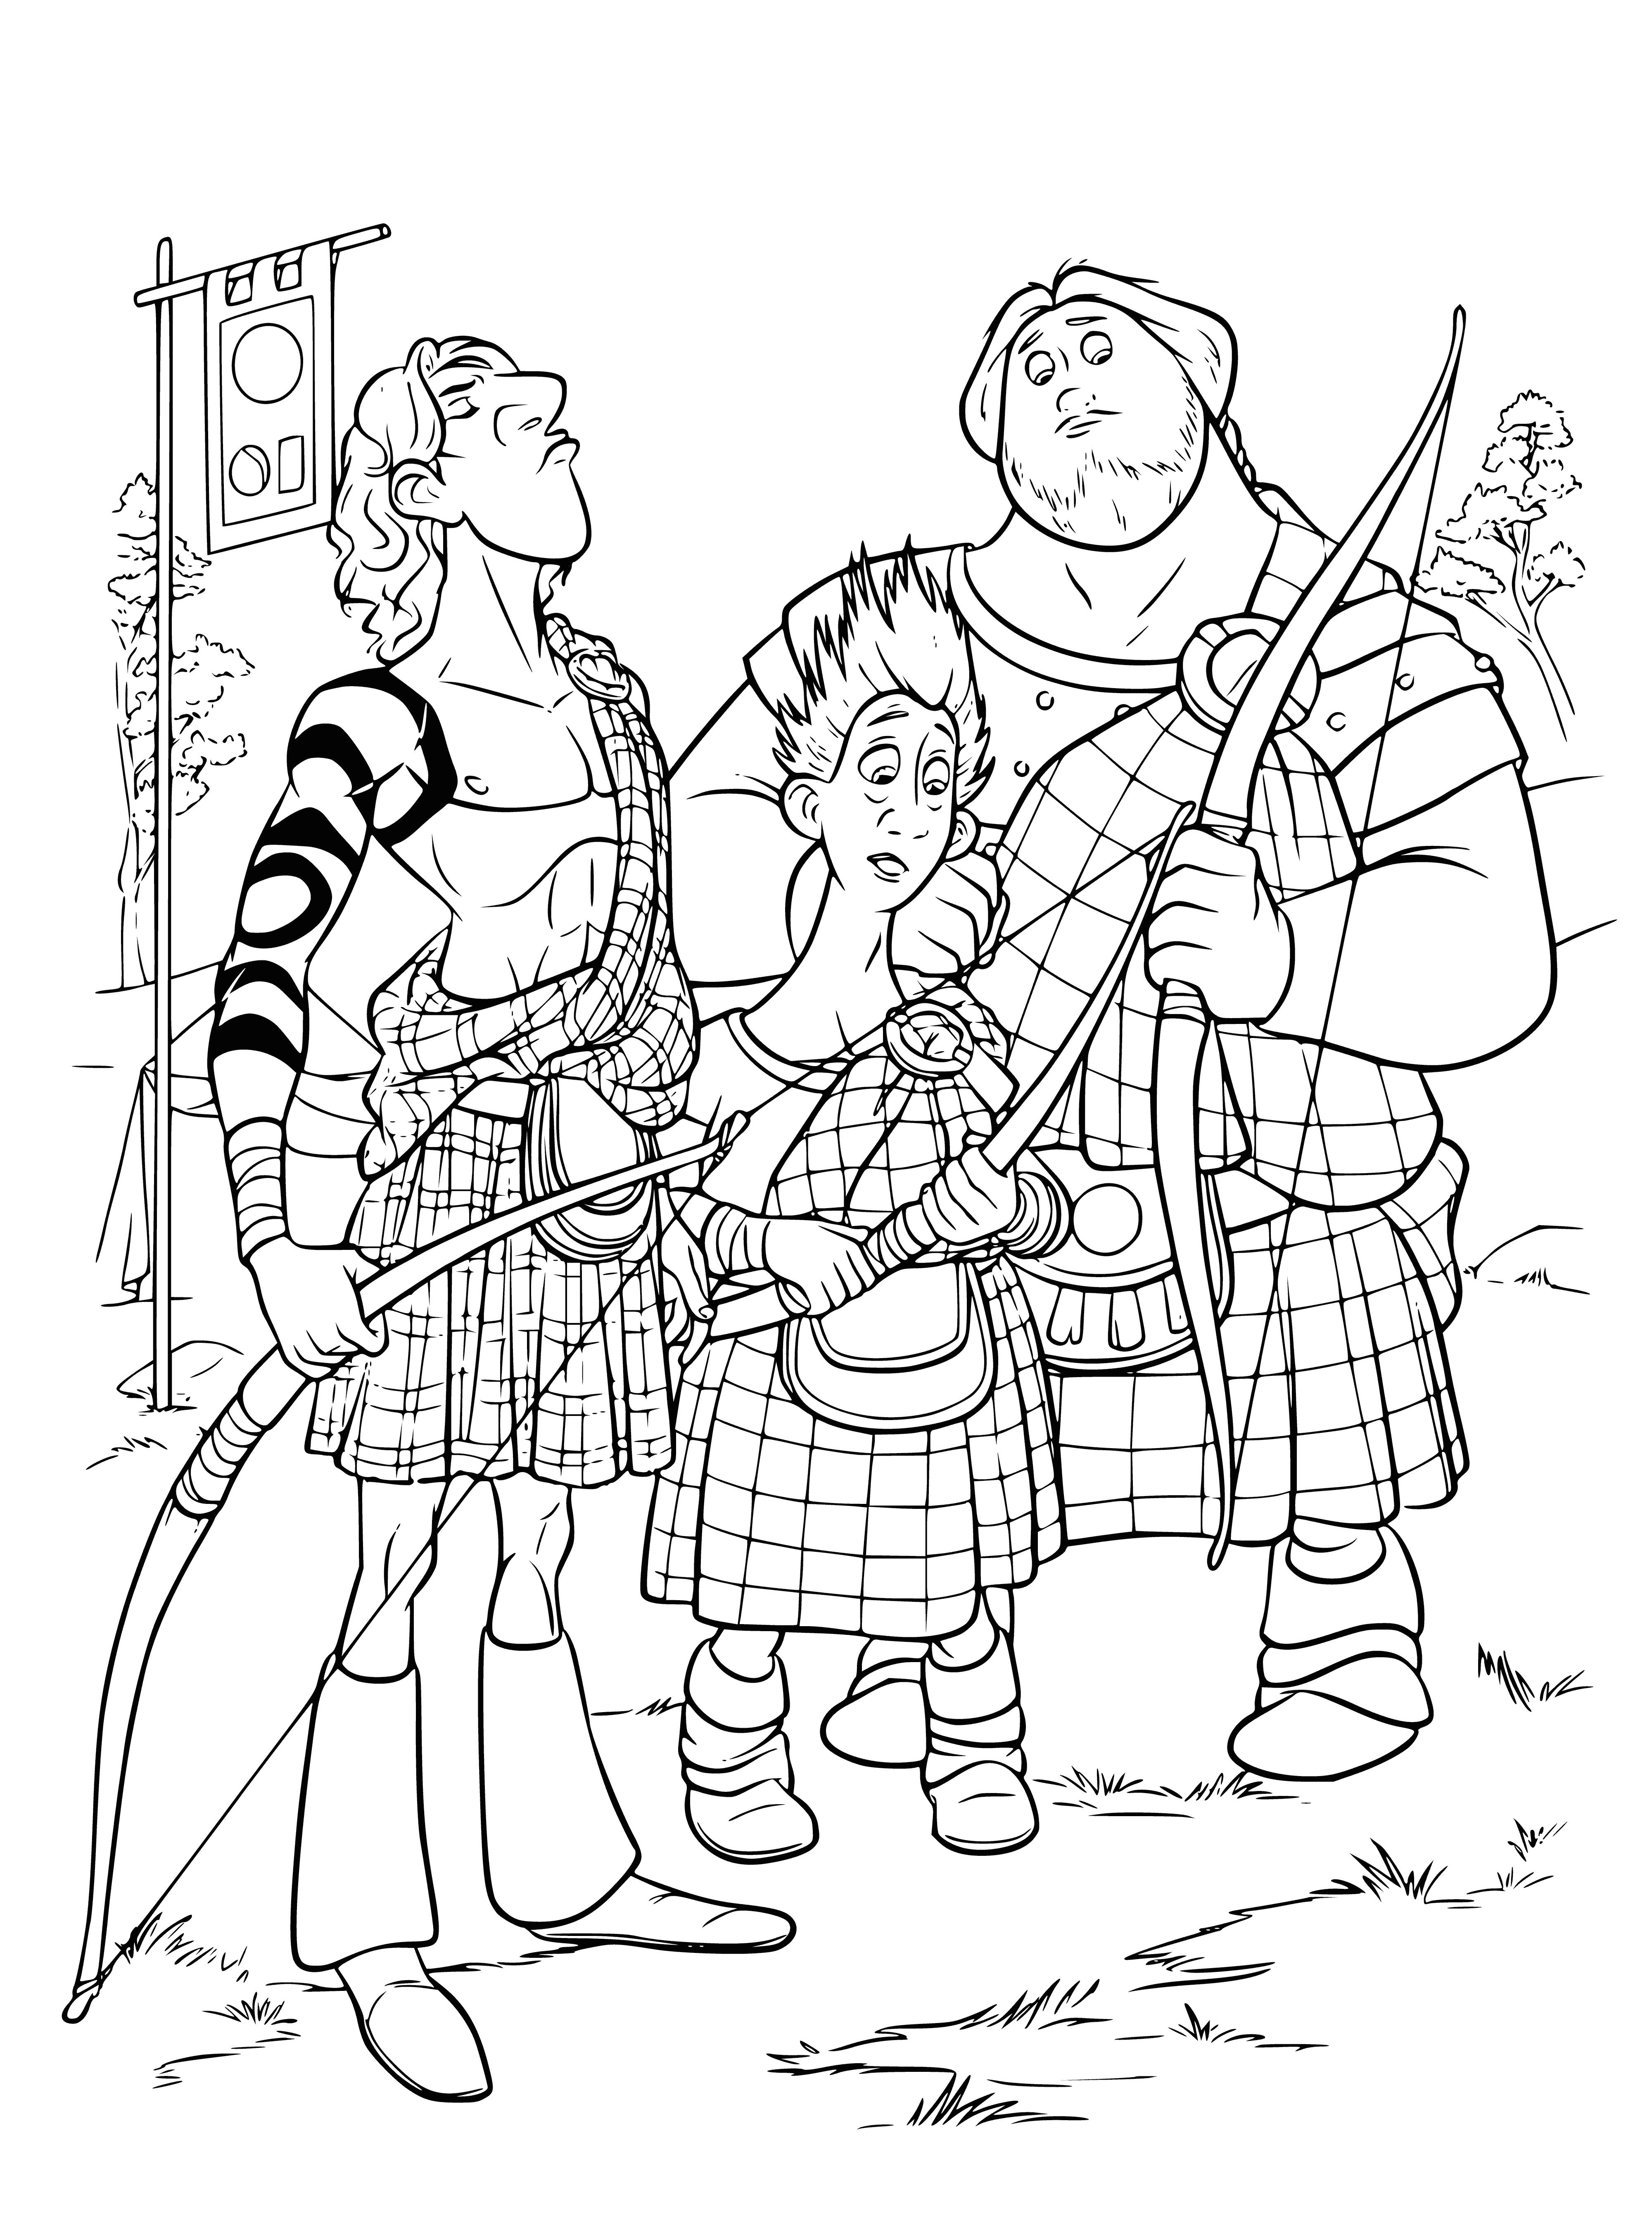 coloring page: Painting of Scottish lords wearing traditional attire, holding weapons, ready for battle in a castle-surrounded landscape.